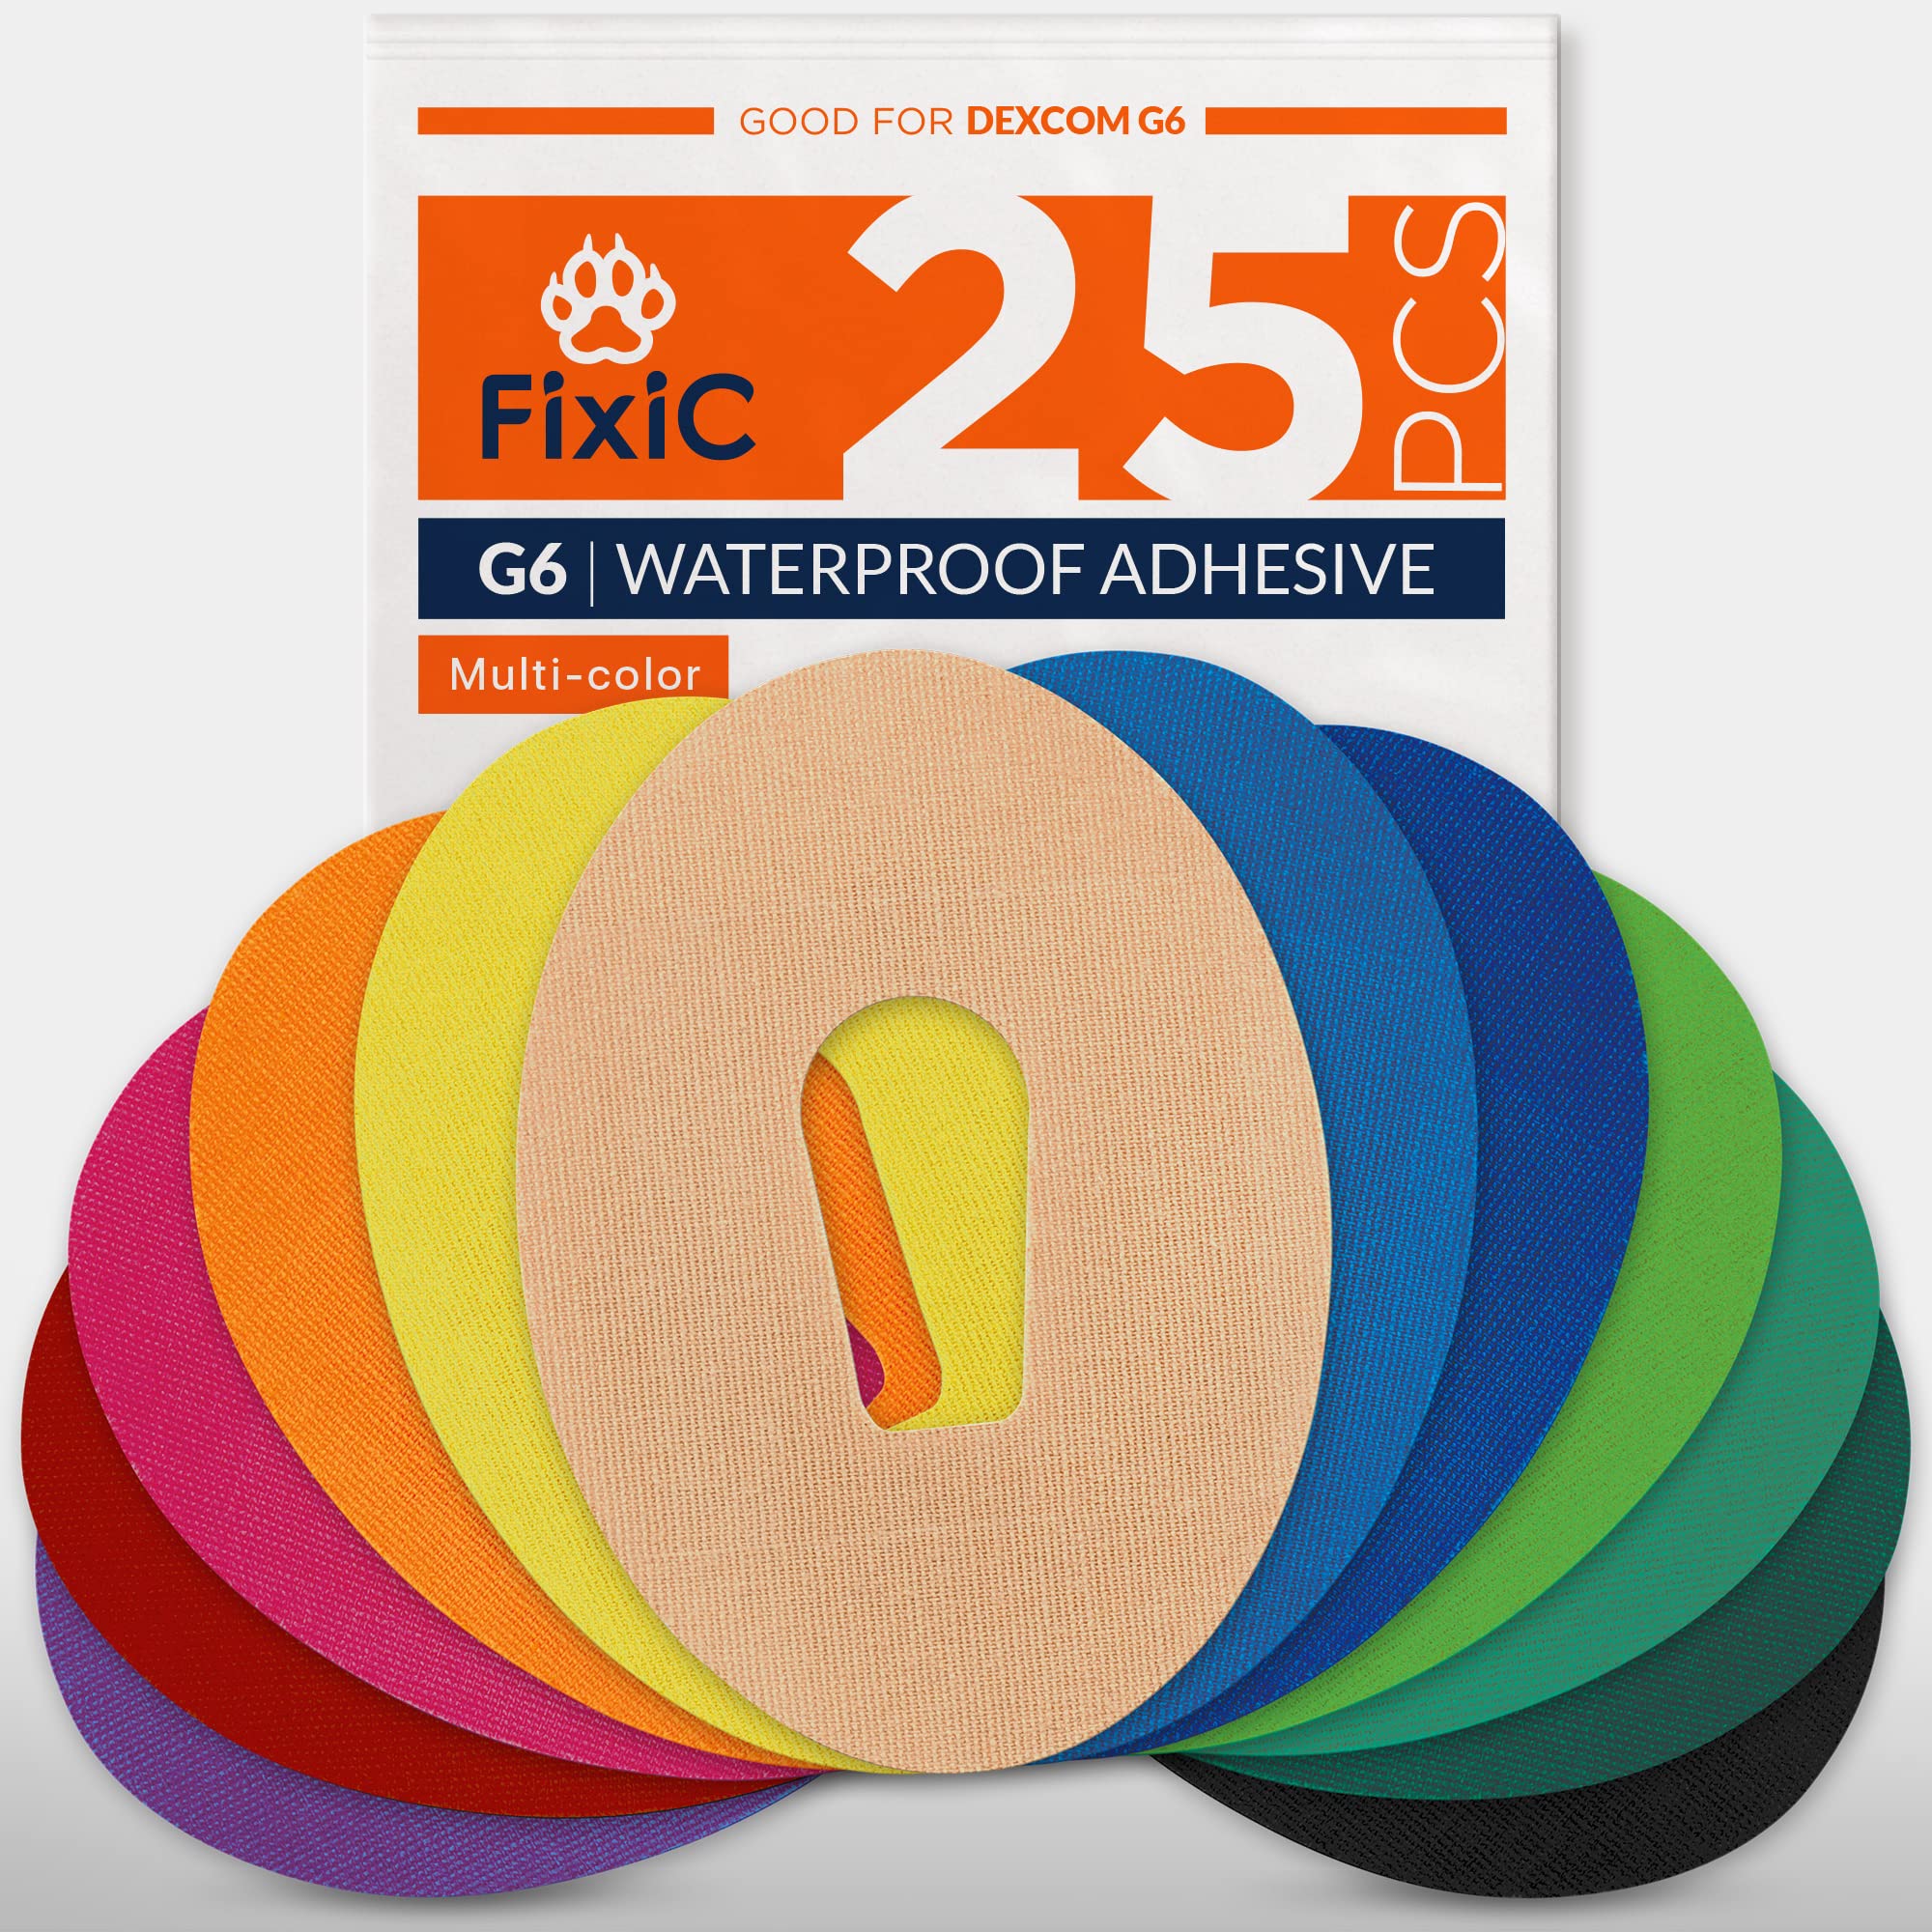 FixiC Adhesive Patches for G6 25 Pack Premium Waterproof Adhesive Patches  Pre-Cut Back Paper Adhesive Patch for G6 Long Fixation! (Multi-Color)